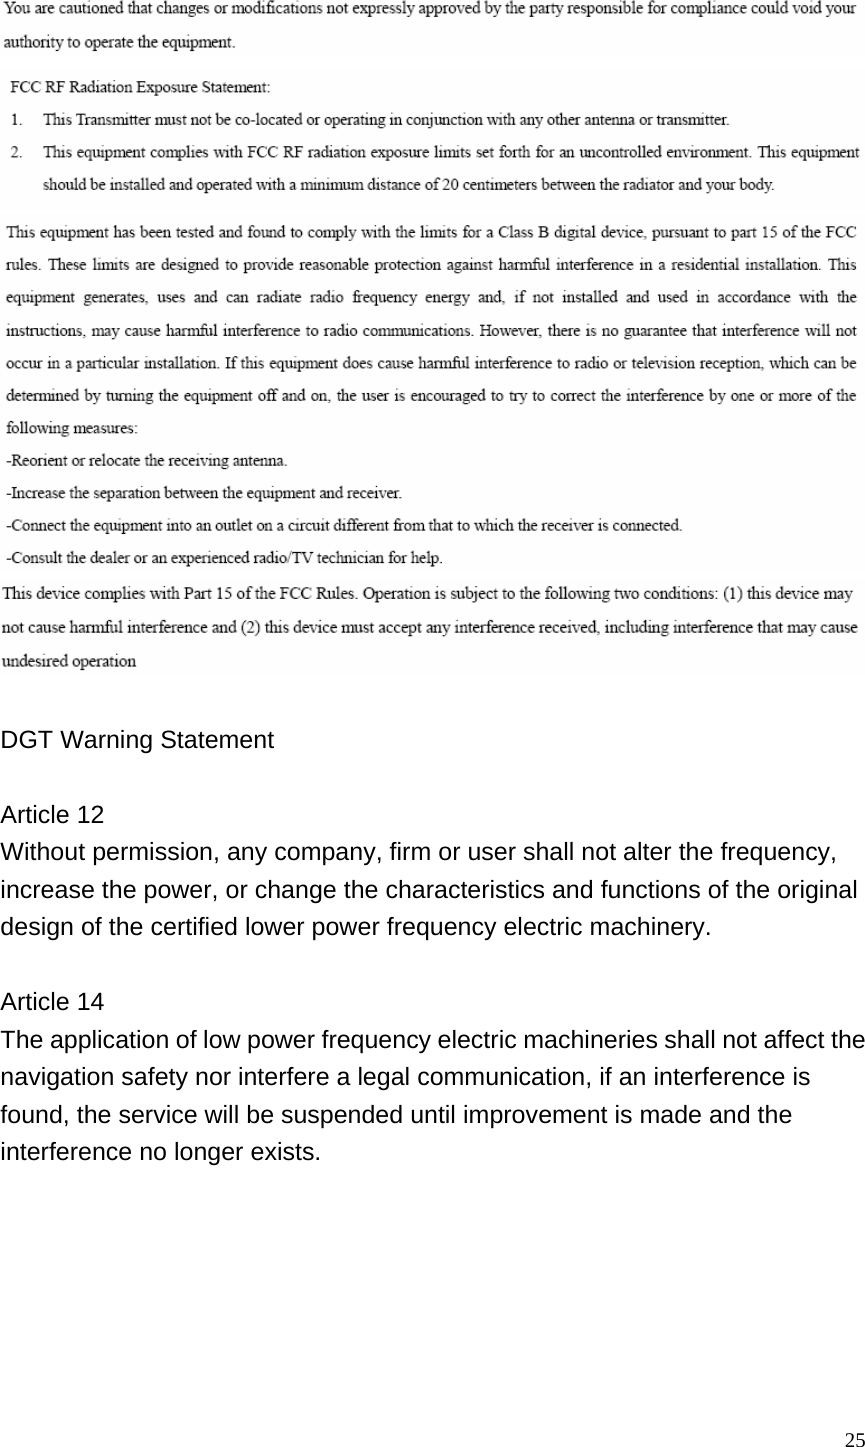  25     DGT Warning Statement  Article 12 Without permission, any company, firm or user shall not alter the frequency, increase the power, or change the characteristics and functions of the original design of the certified lower power frequency electric machinery.  Article 14 The application of low power frequency electric machineries shall not affect the navigation safety nor interfere a legal communication, if an interference is found, the service will be suspended until improvement is made and the interference no longer exists.  